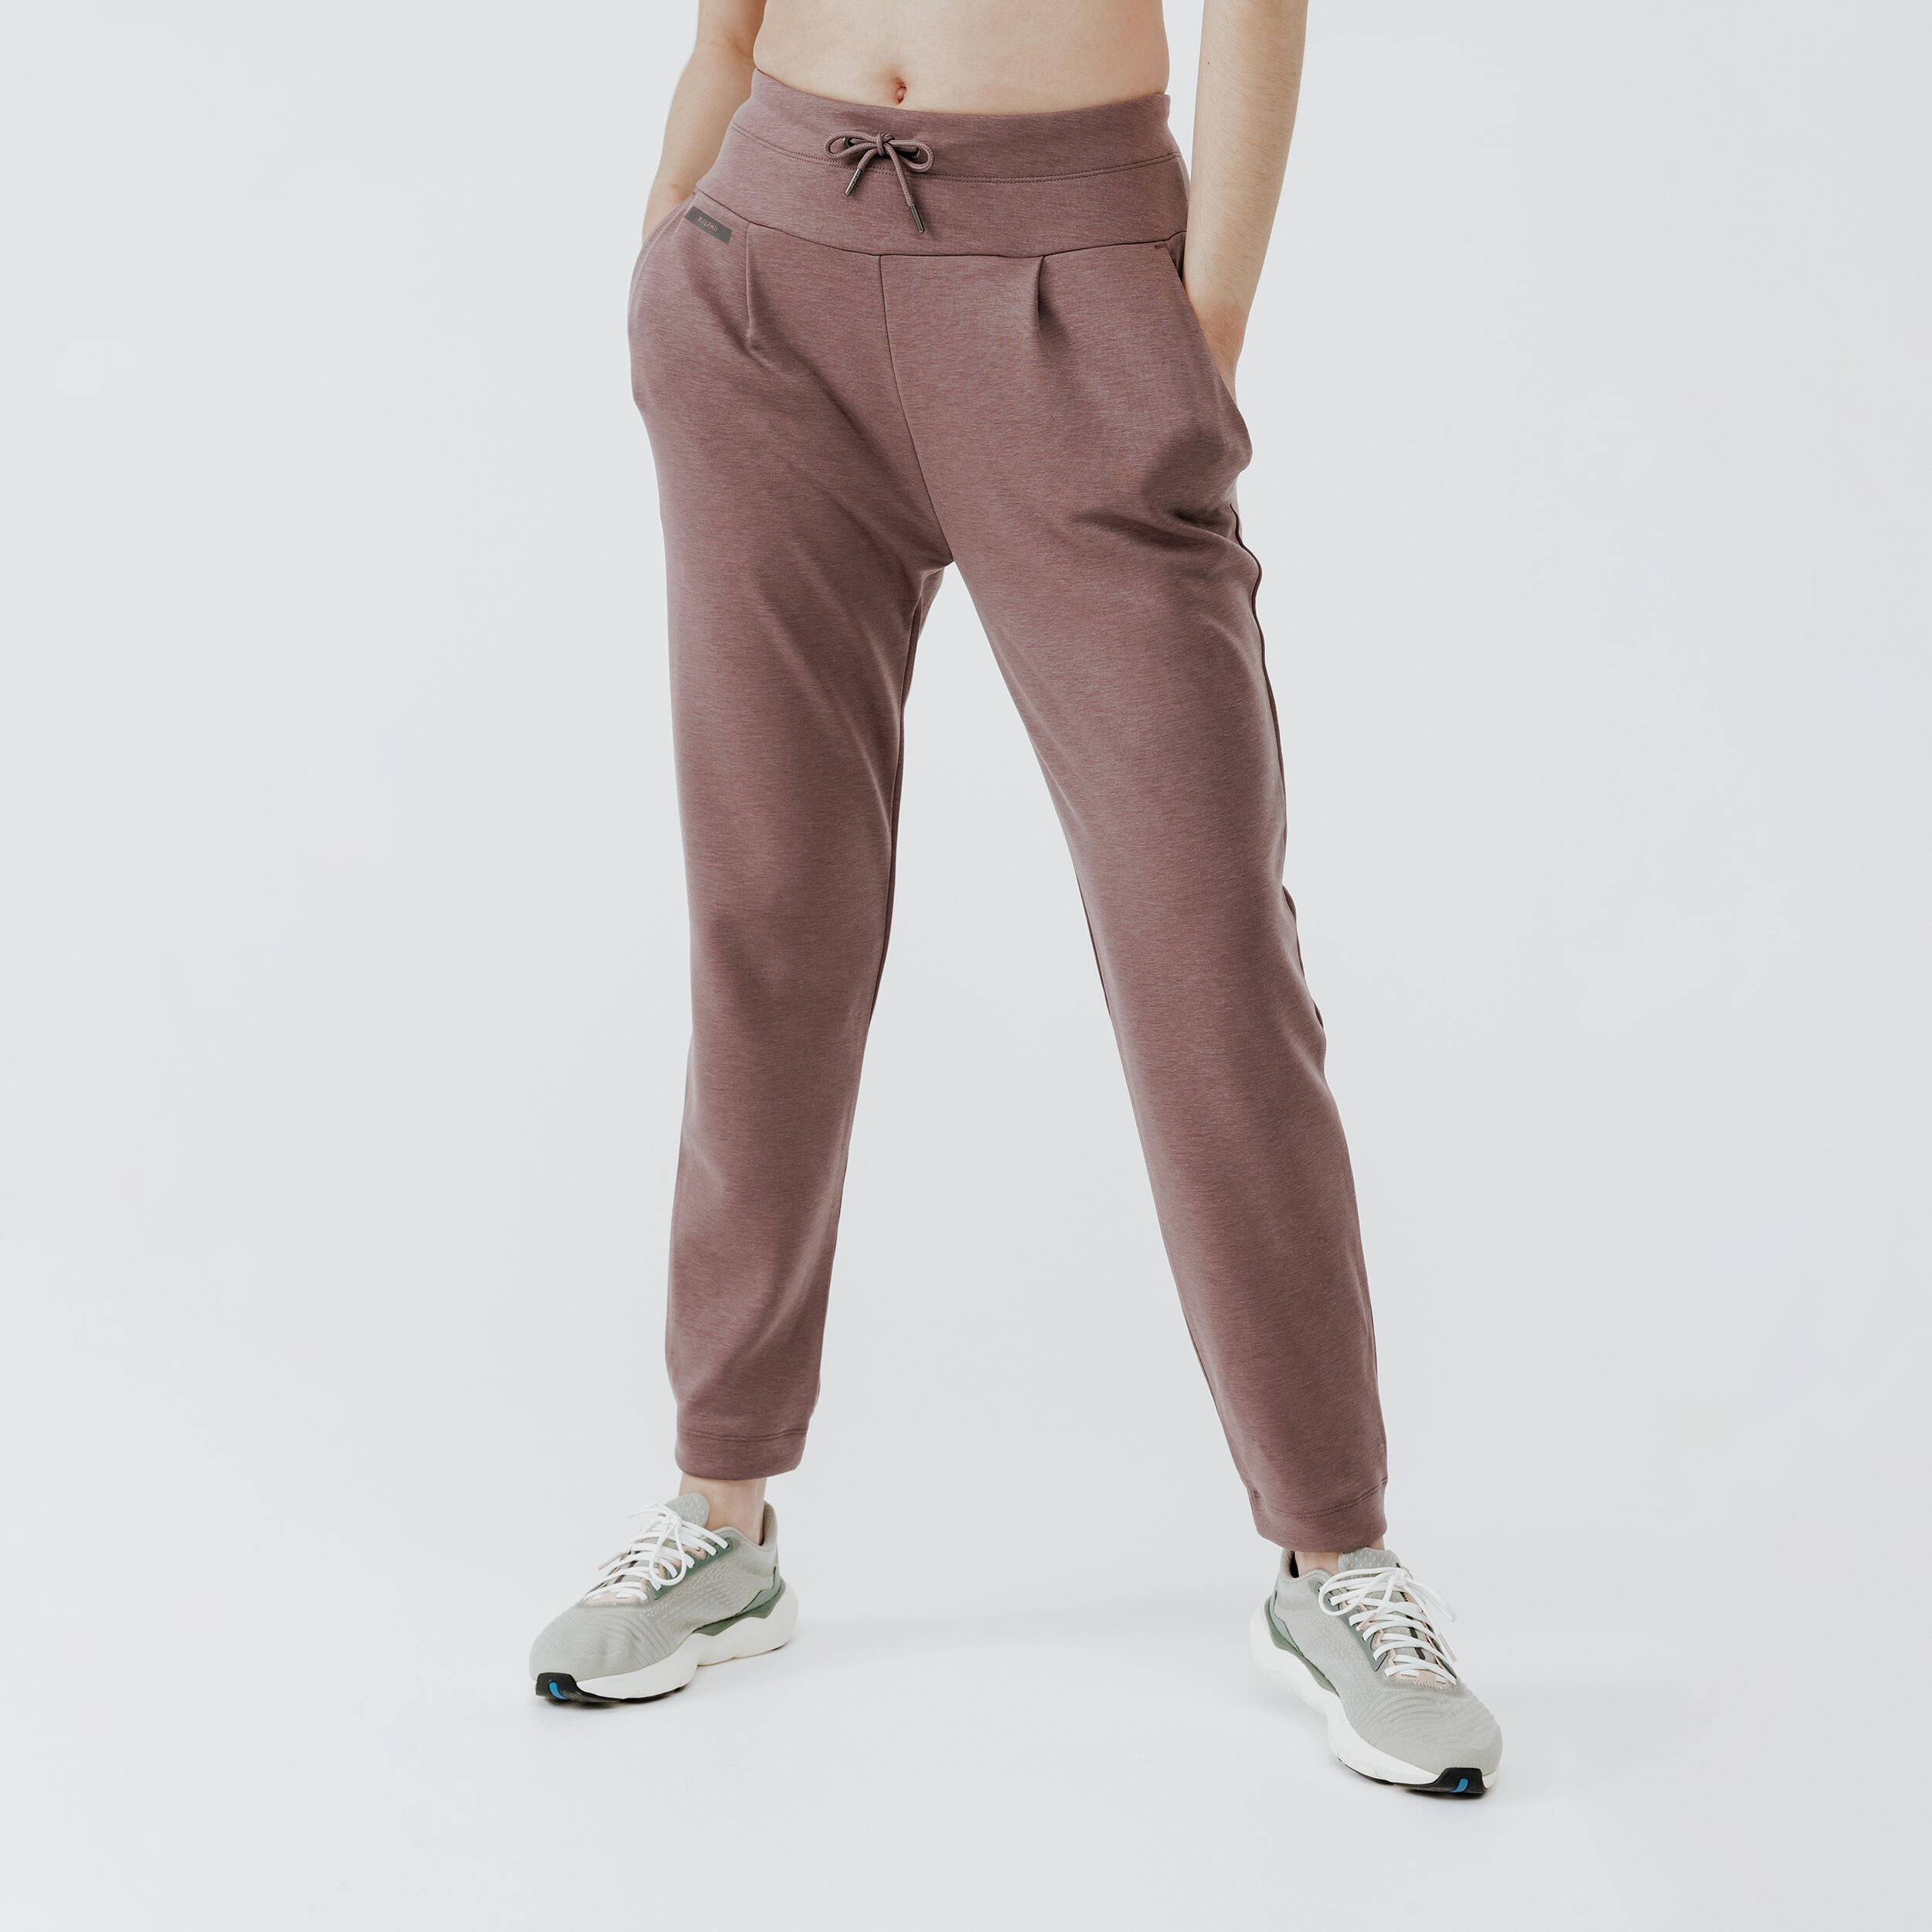 Pants For Women | Joggers | H&M Indonesia